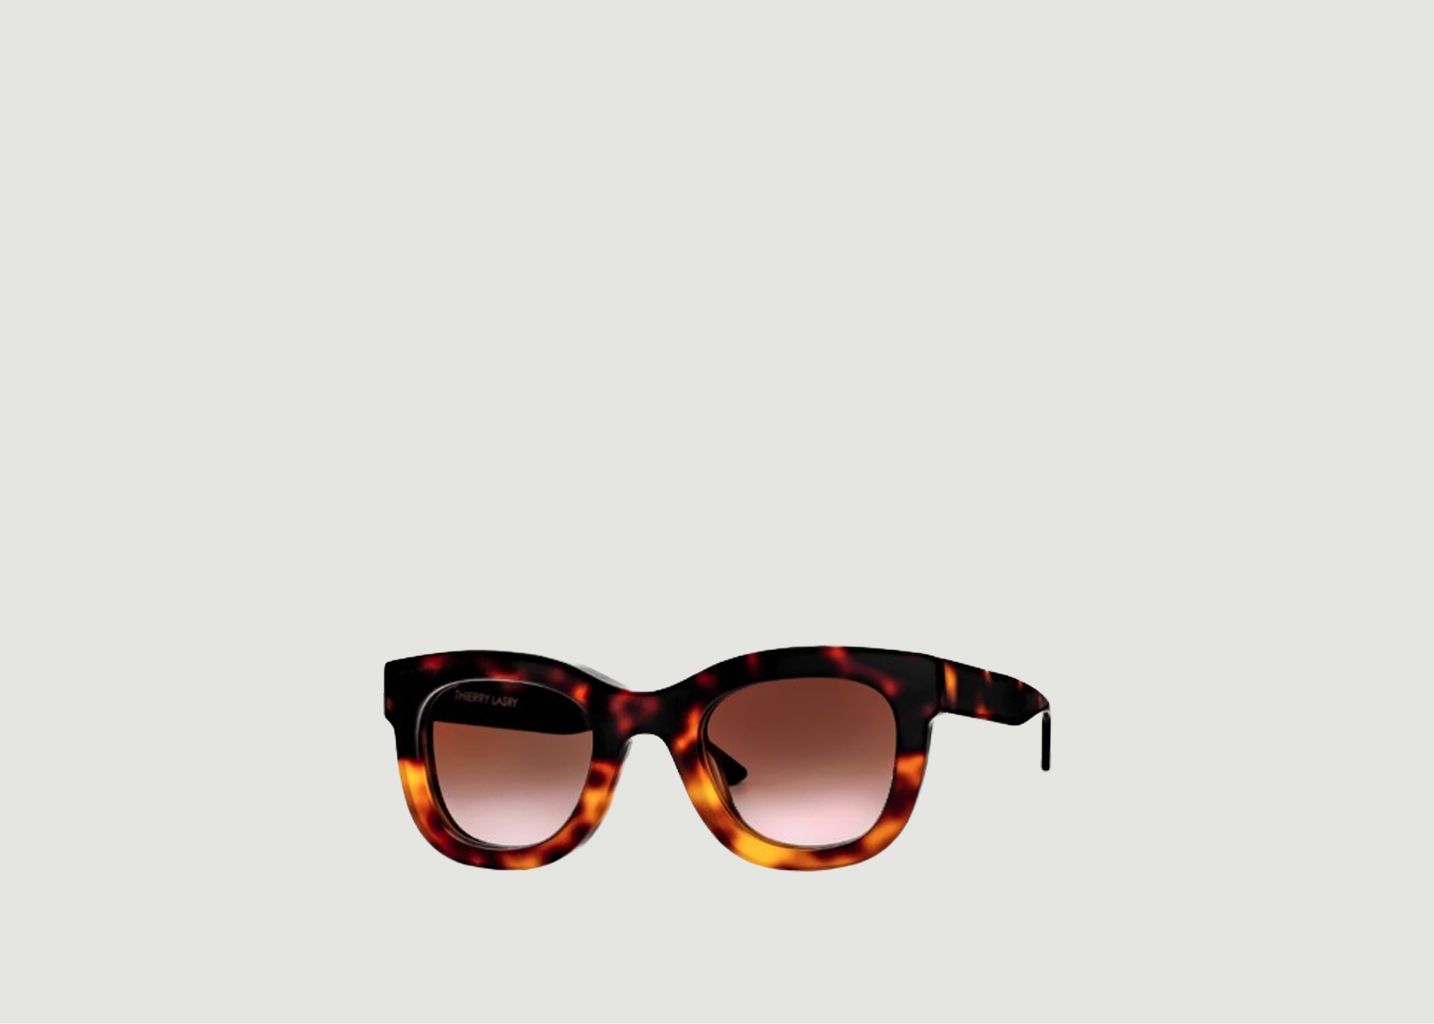 Lunettes de Soleil Gambly - Thierry Lasry